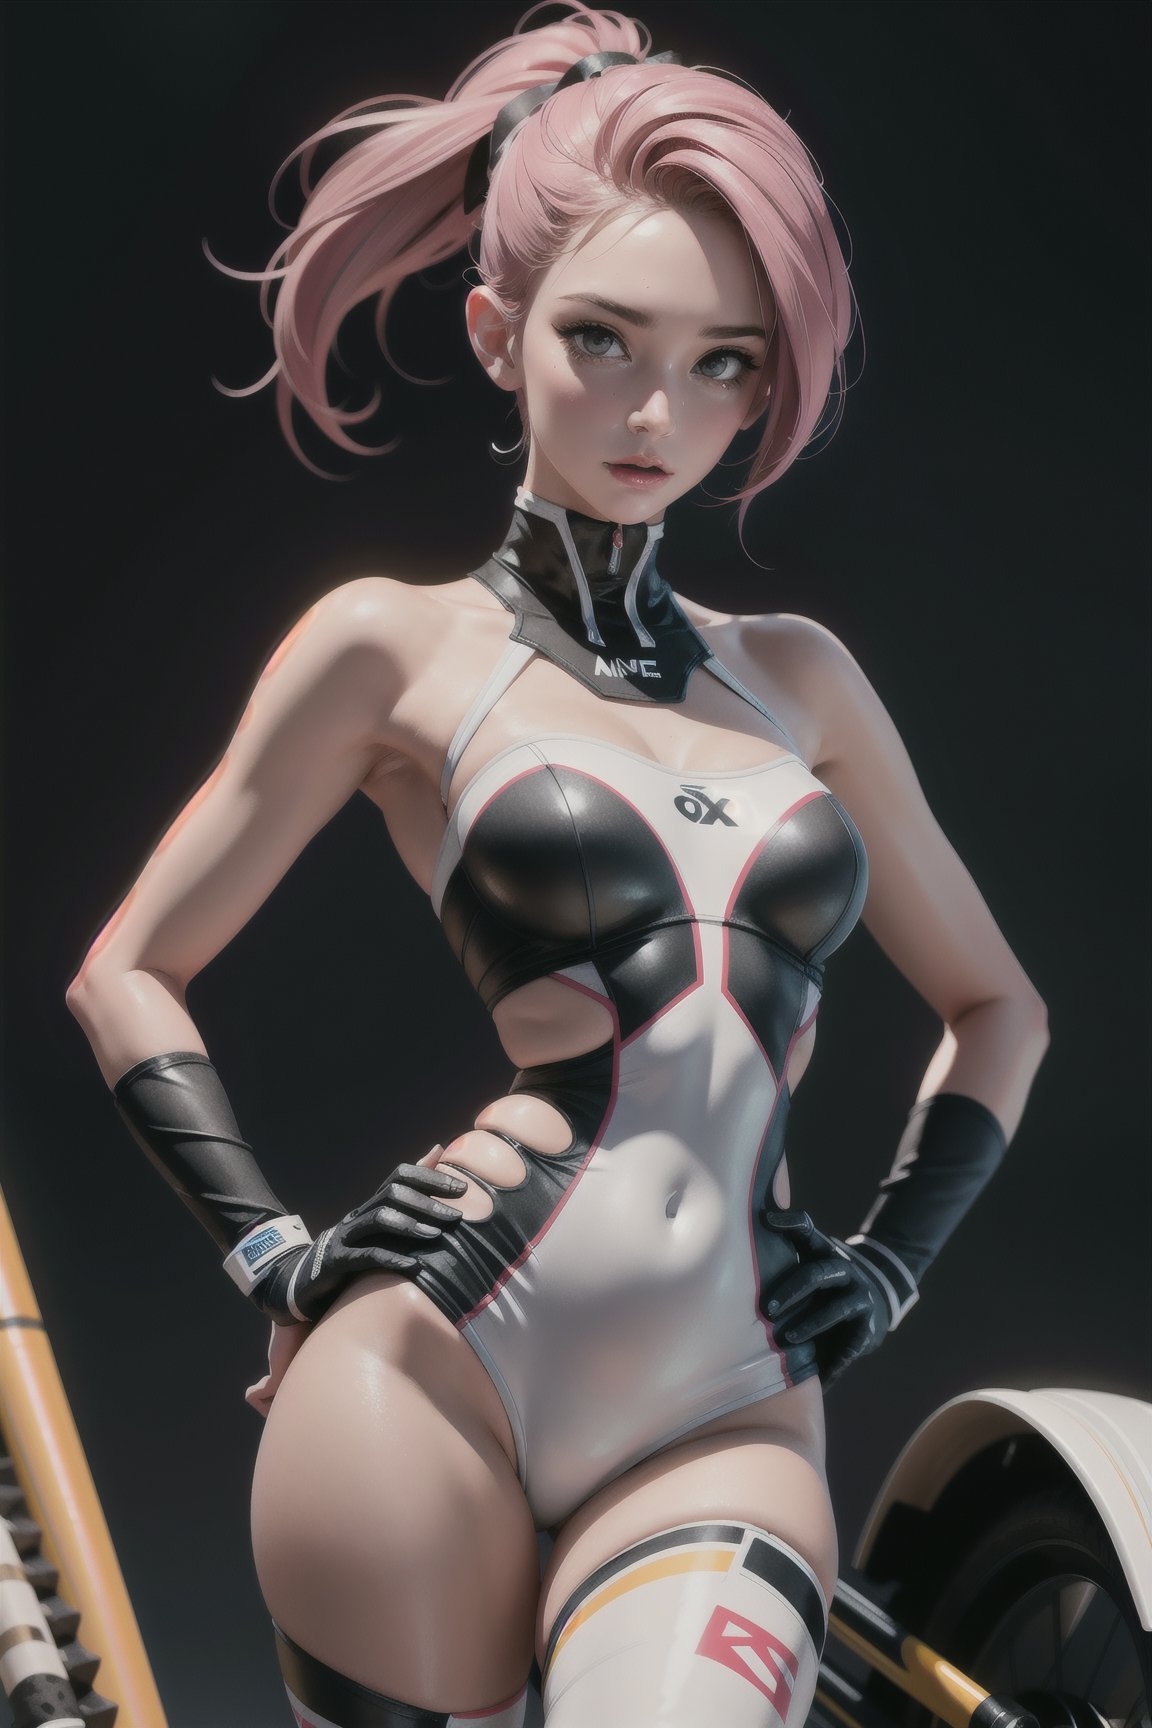 Create a photorealistic image of a woman with Torn dressed Motocross suit. Strapless should have a fit and athletic build,  suggesting that she has short rainbow hair,  hand on her hip. Her expression should convey a sense of determination